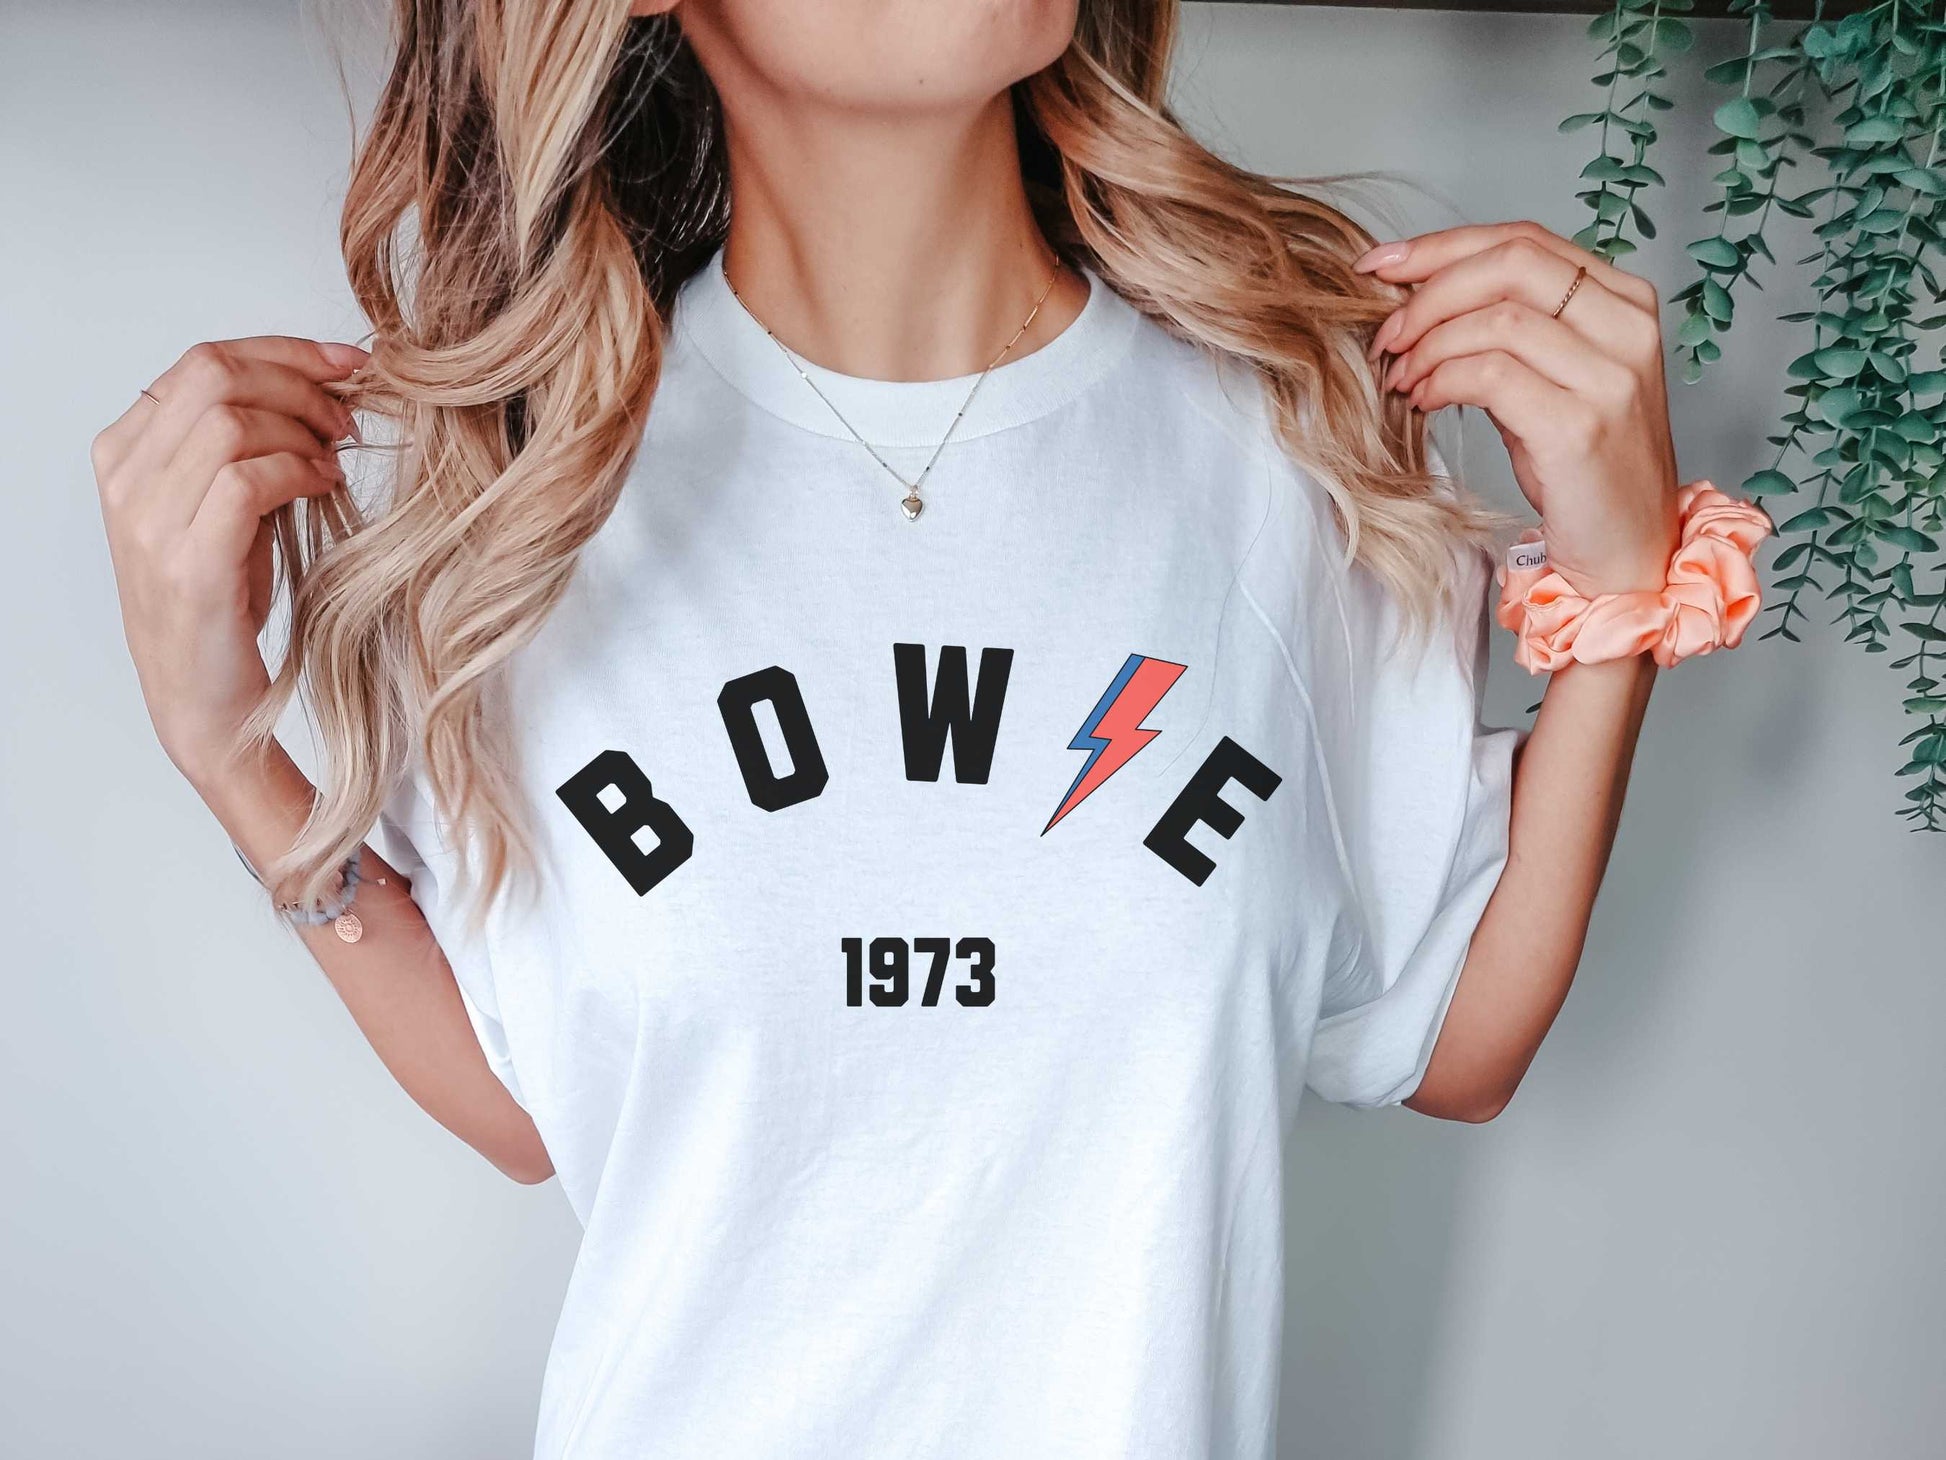 David Bowie "Bowie 1973" T-Shirt in White